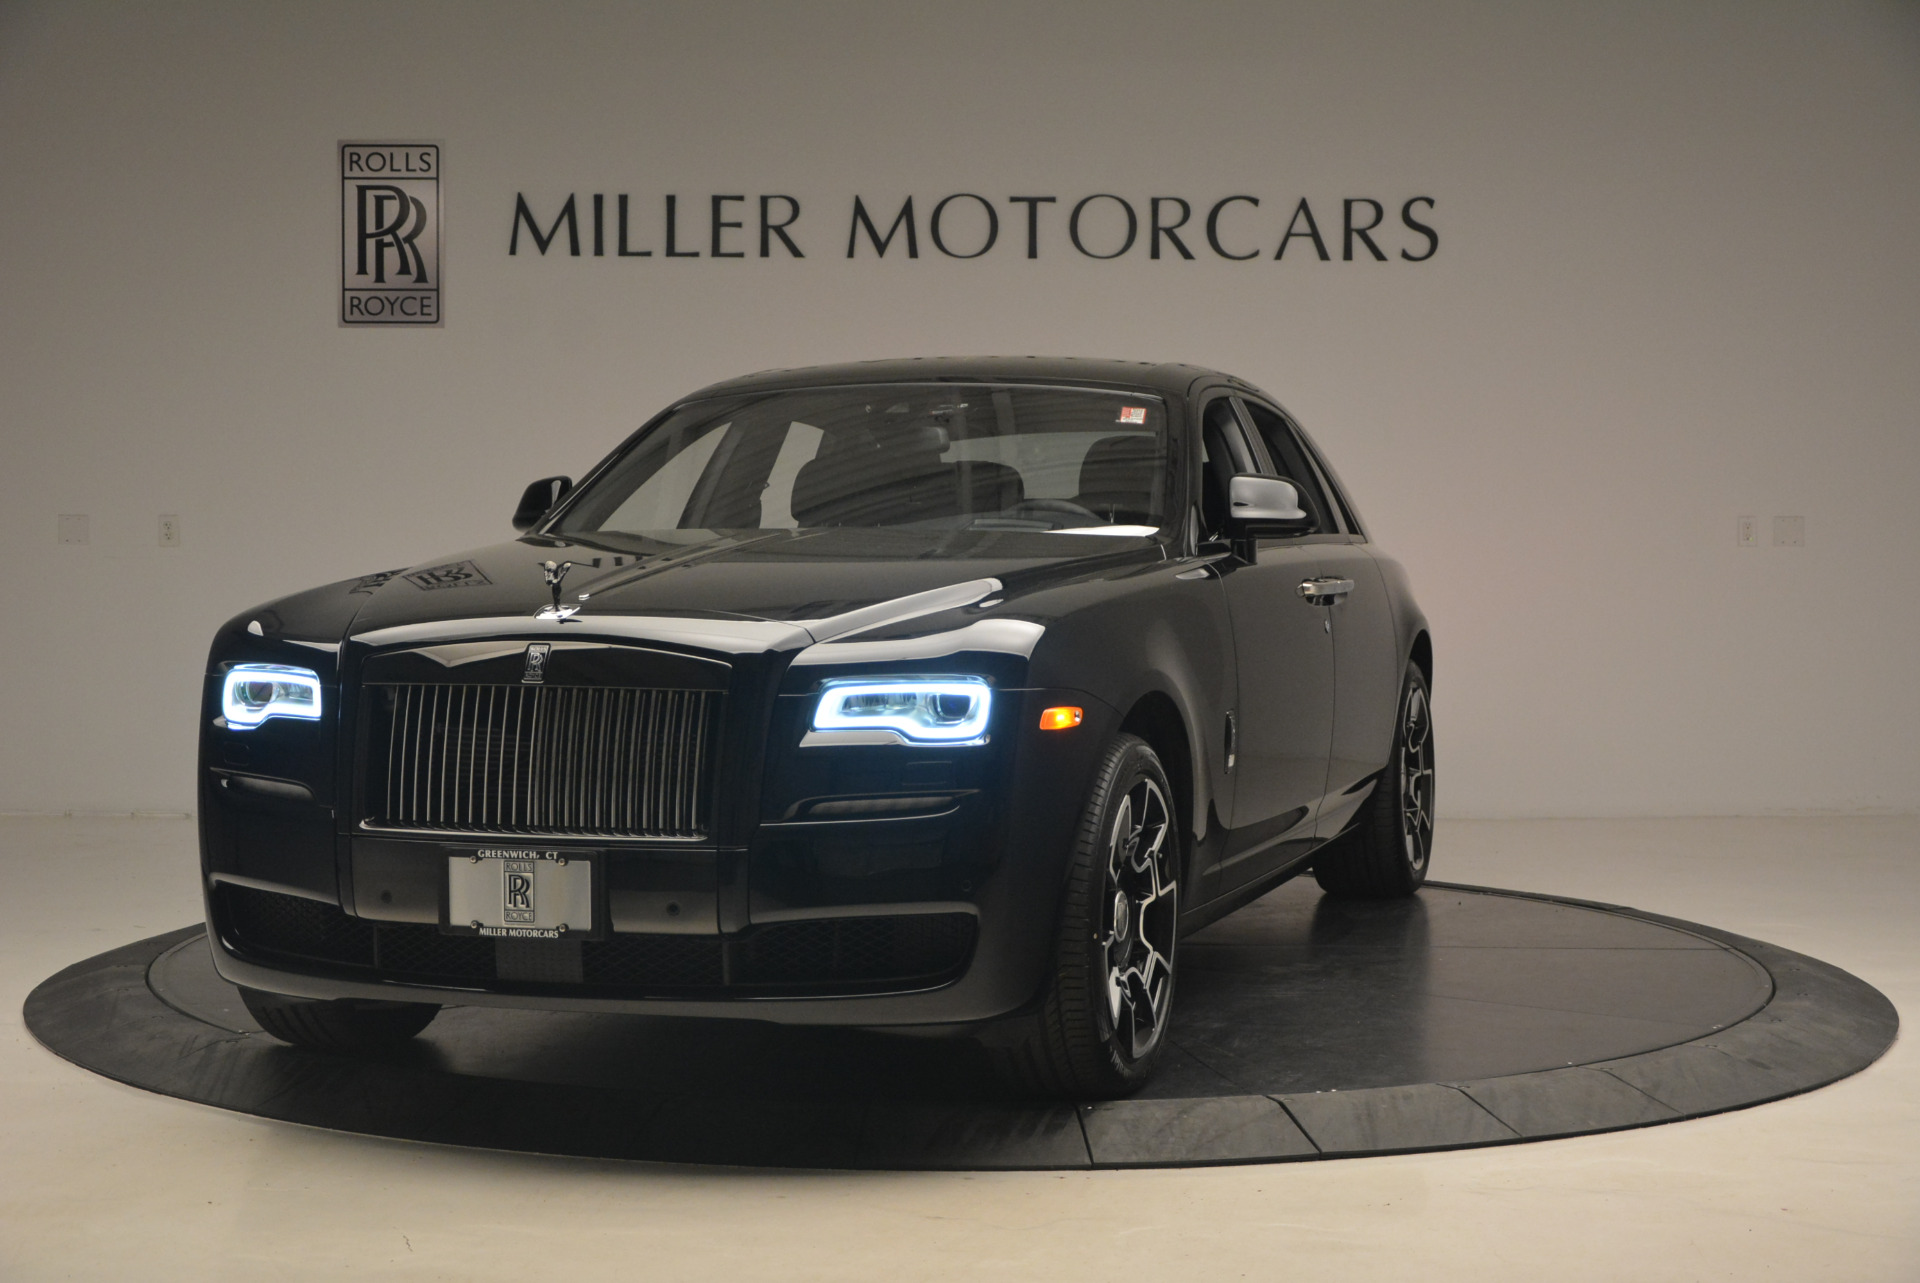 New 2017 Rolls-Royce Ghost Black Badge for sale Sold at Rolls-Royce Motor Cars Greenwich in Greenwich CT 06830 1